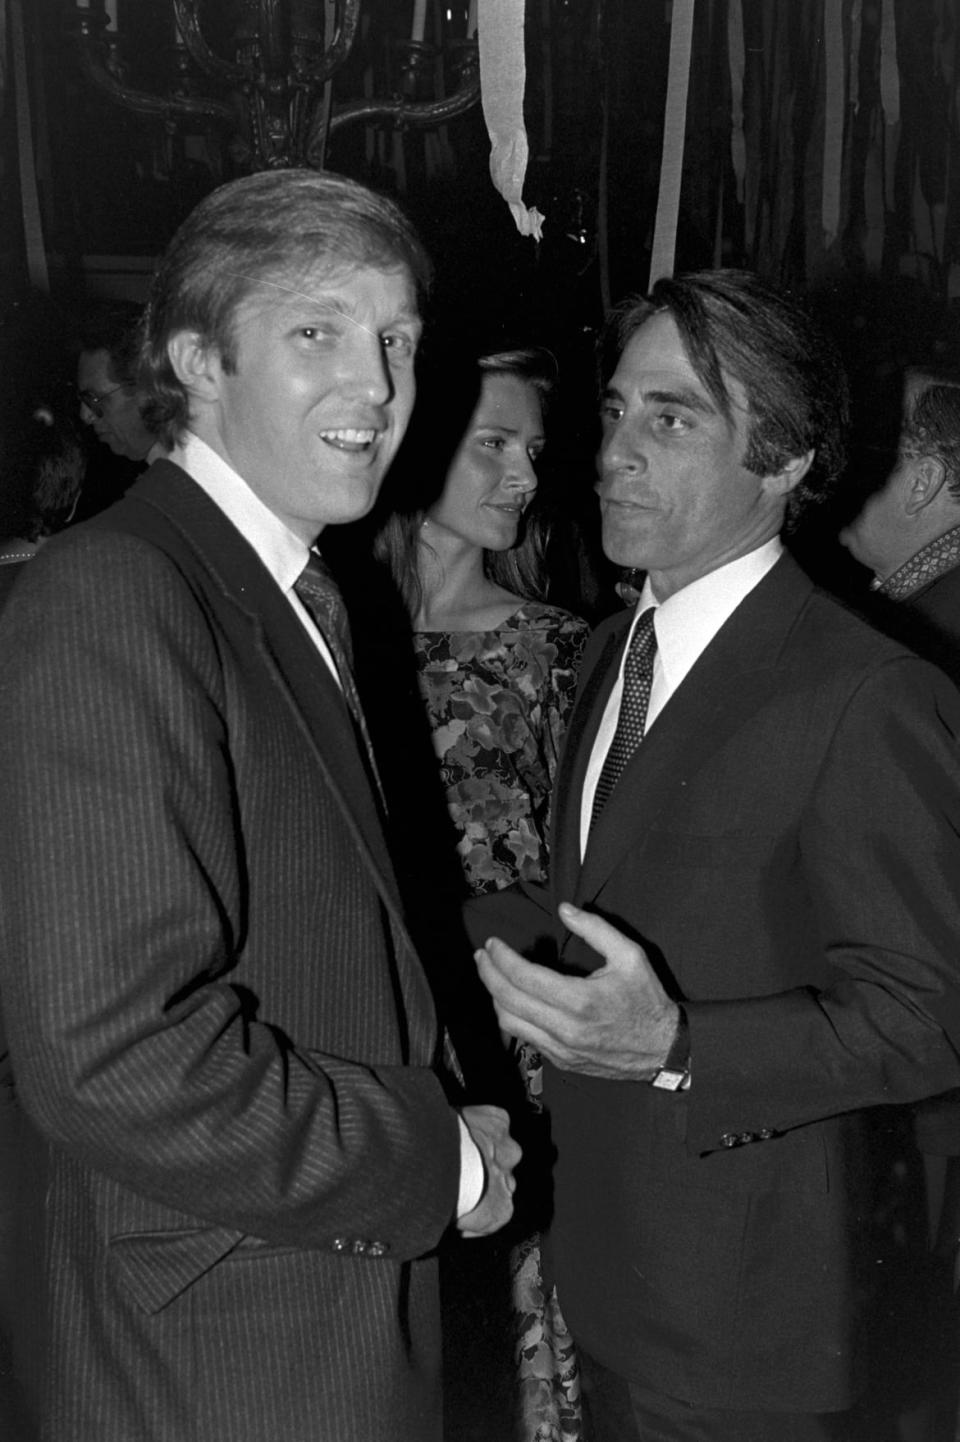 Donald Trump in his 30s in black and white staring at the camera with another man to his right